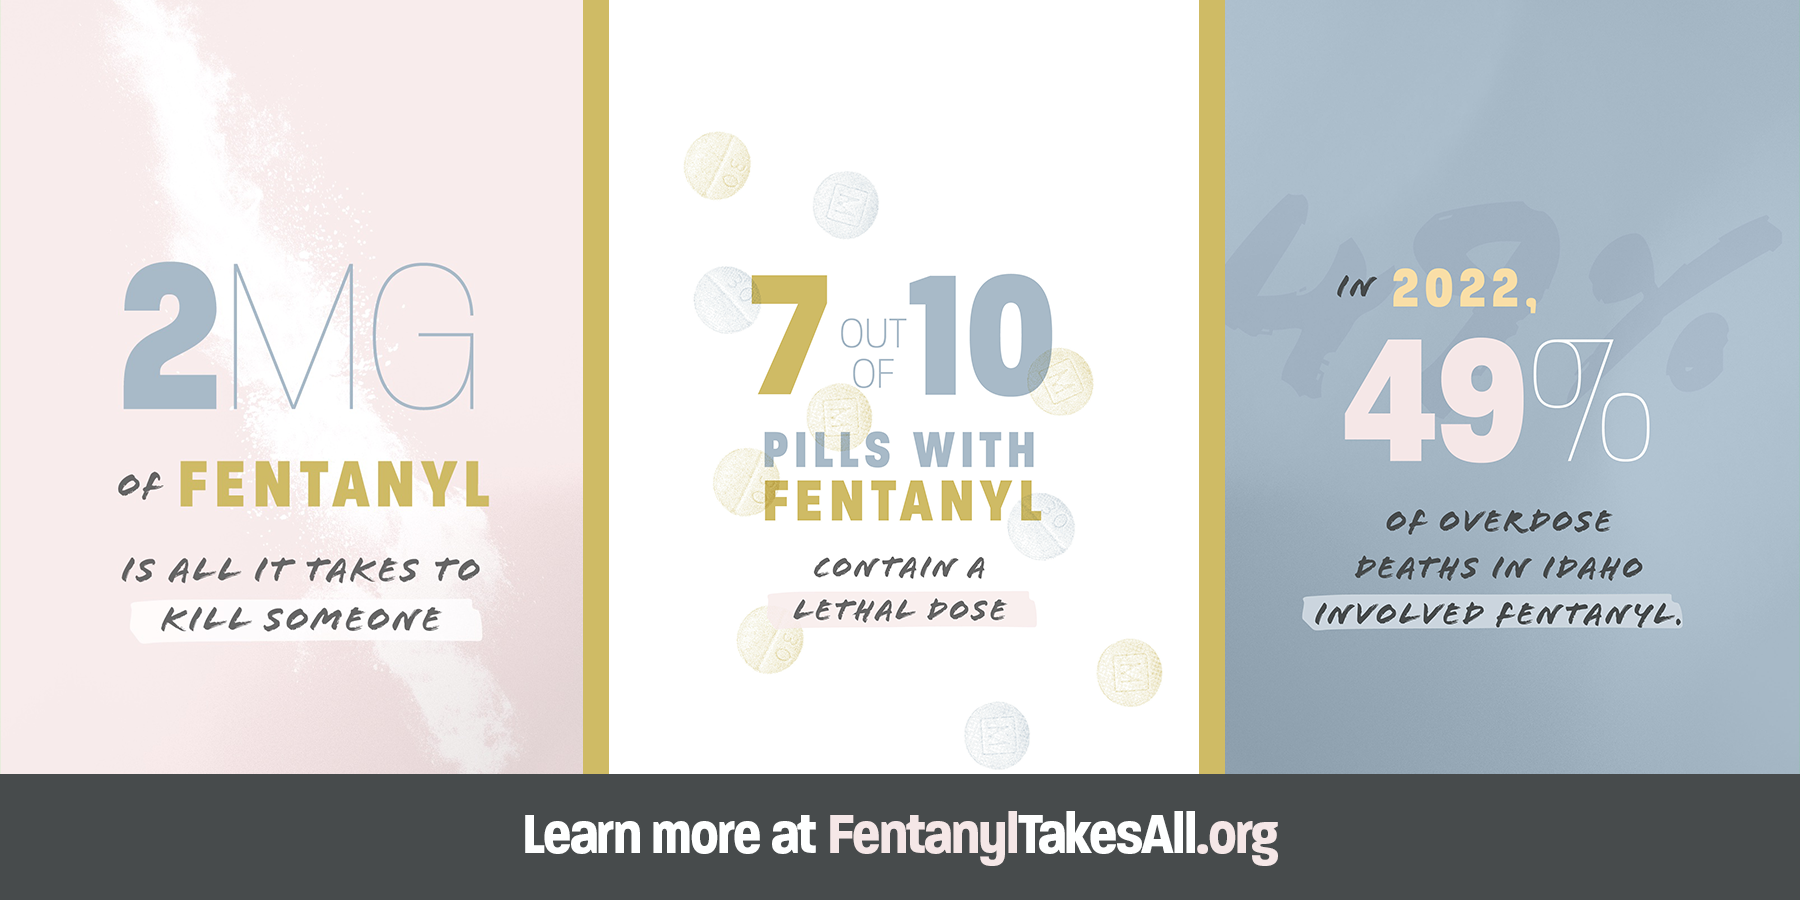 Slide linking to the Fentanyl Takes All website